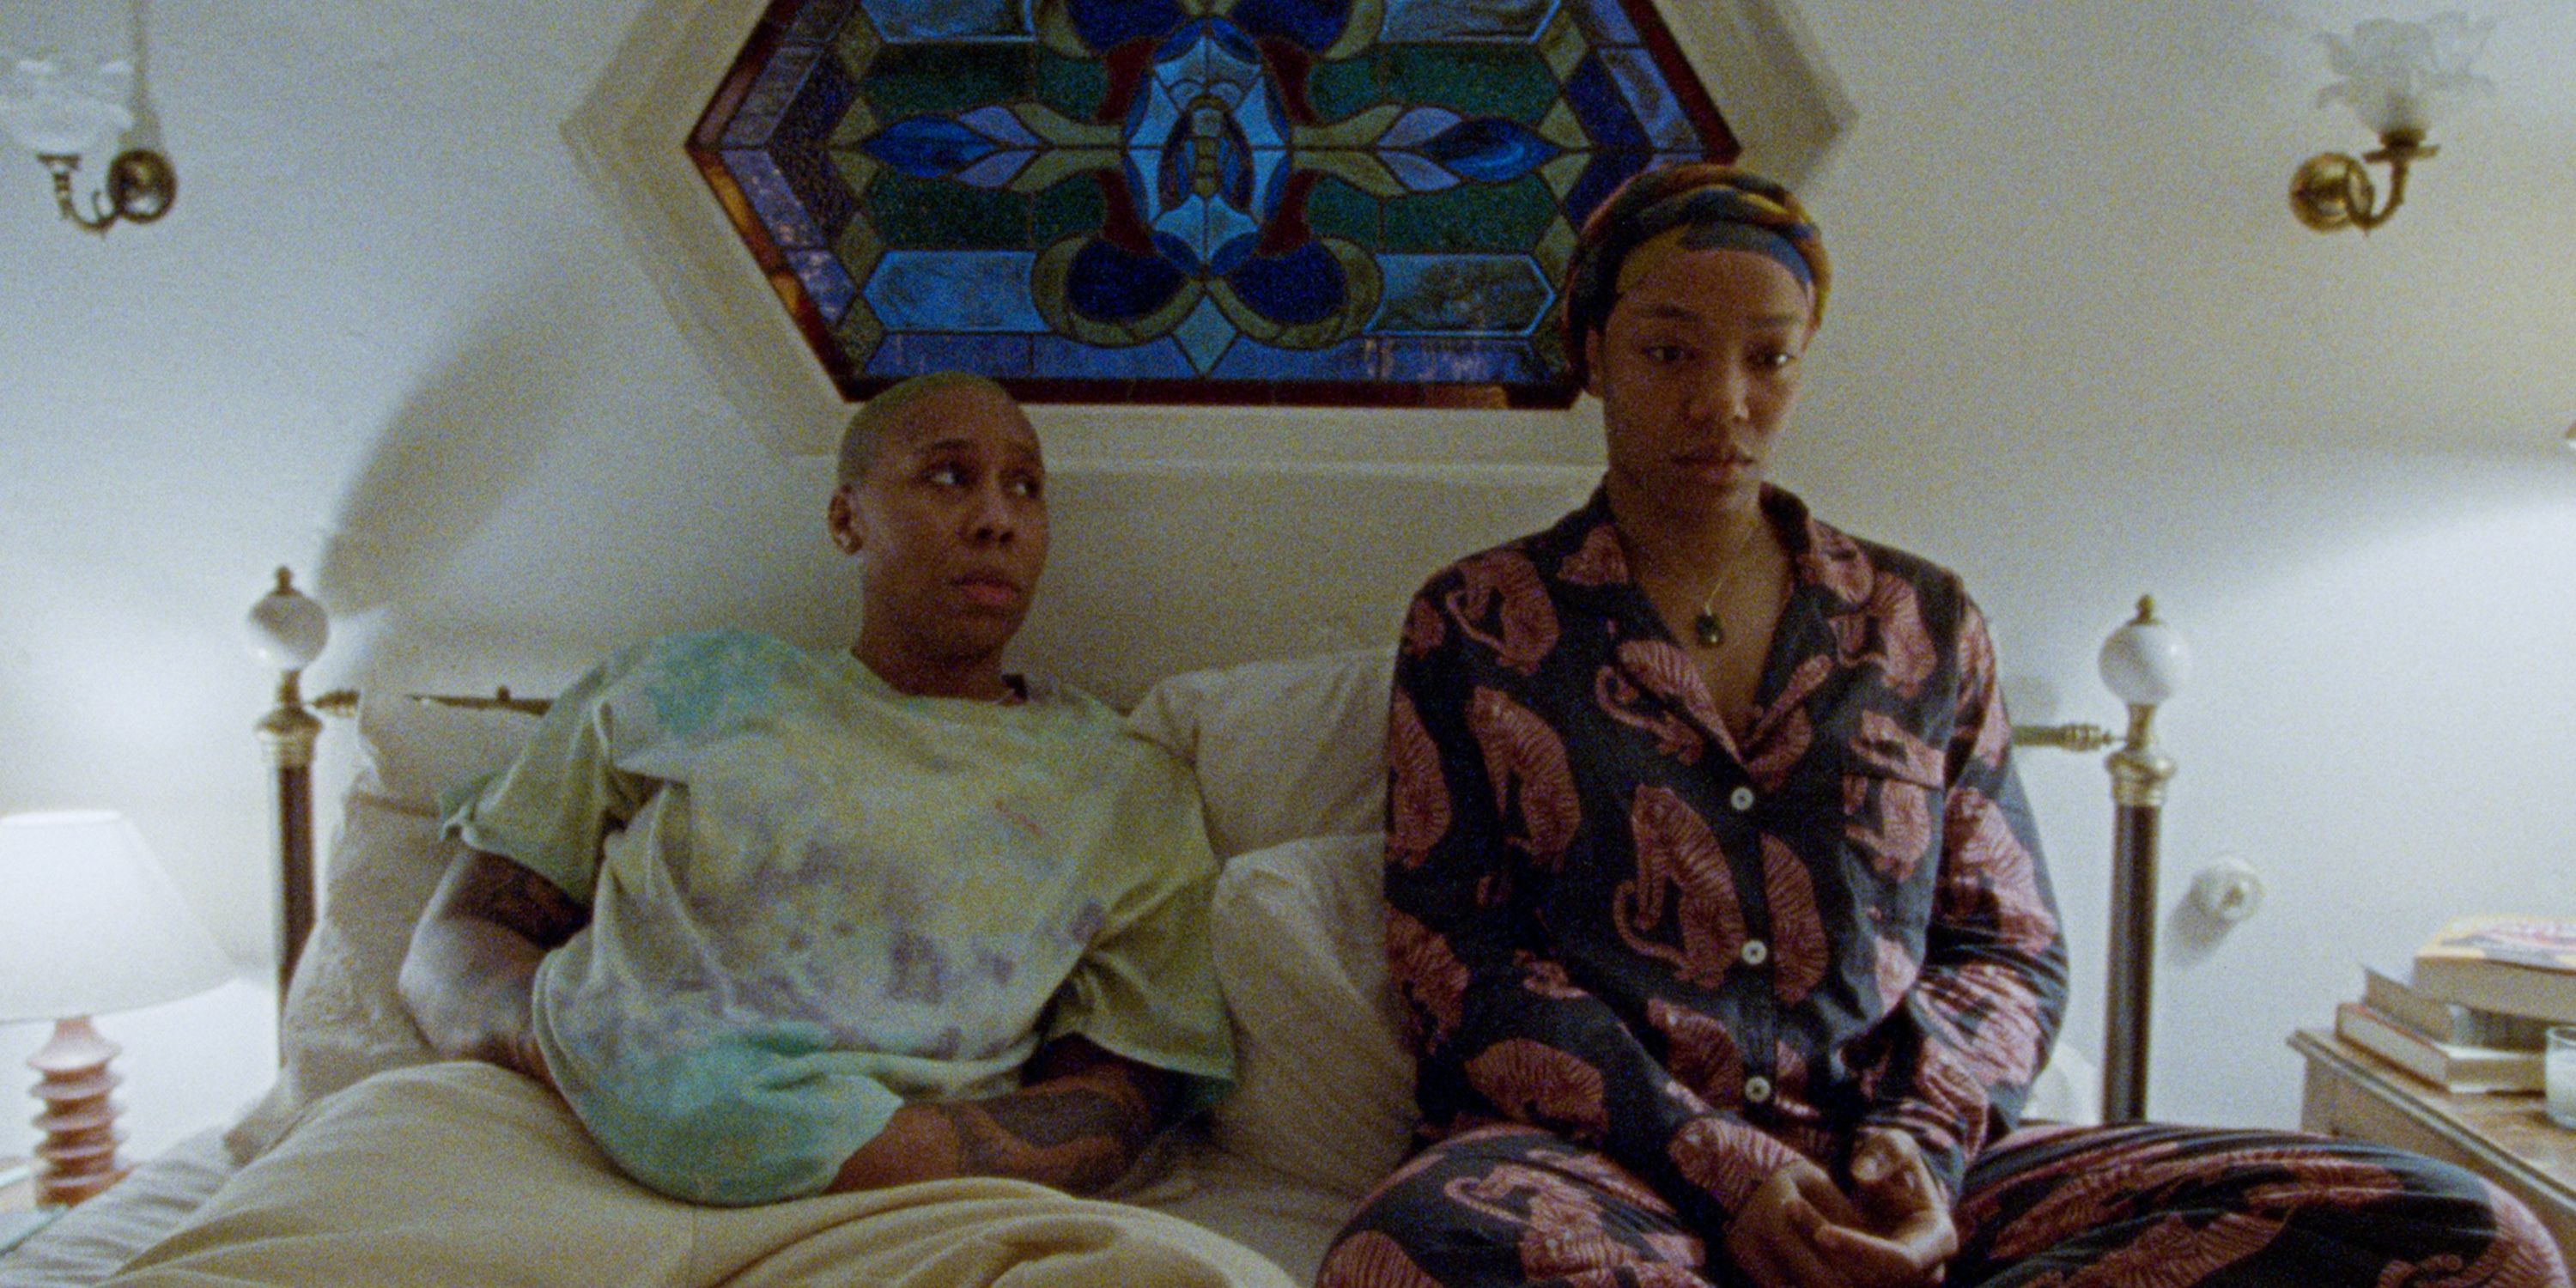 Moments in Love on Netflix - Lena Waithe as Denise and Naomi Ackie as Alicia in Master of None Presents: Moments in Love on Netflix